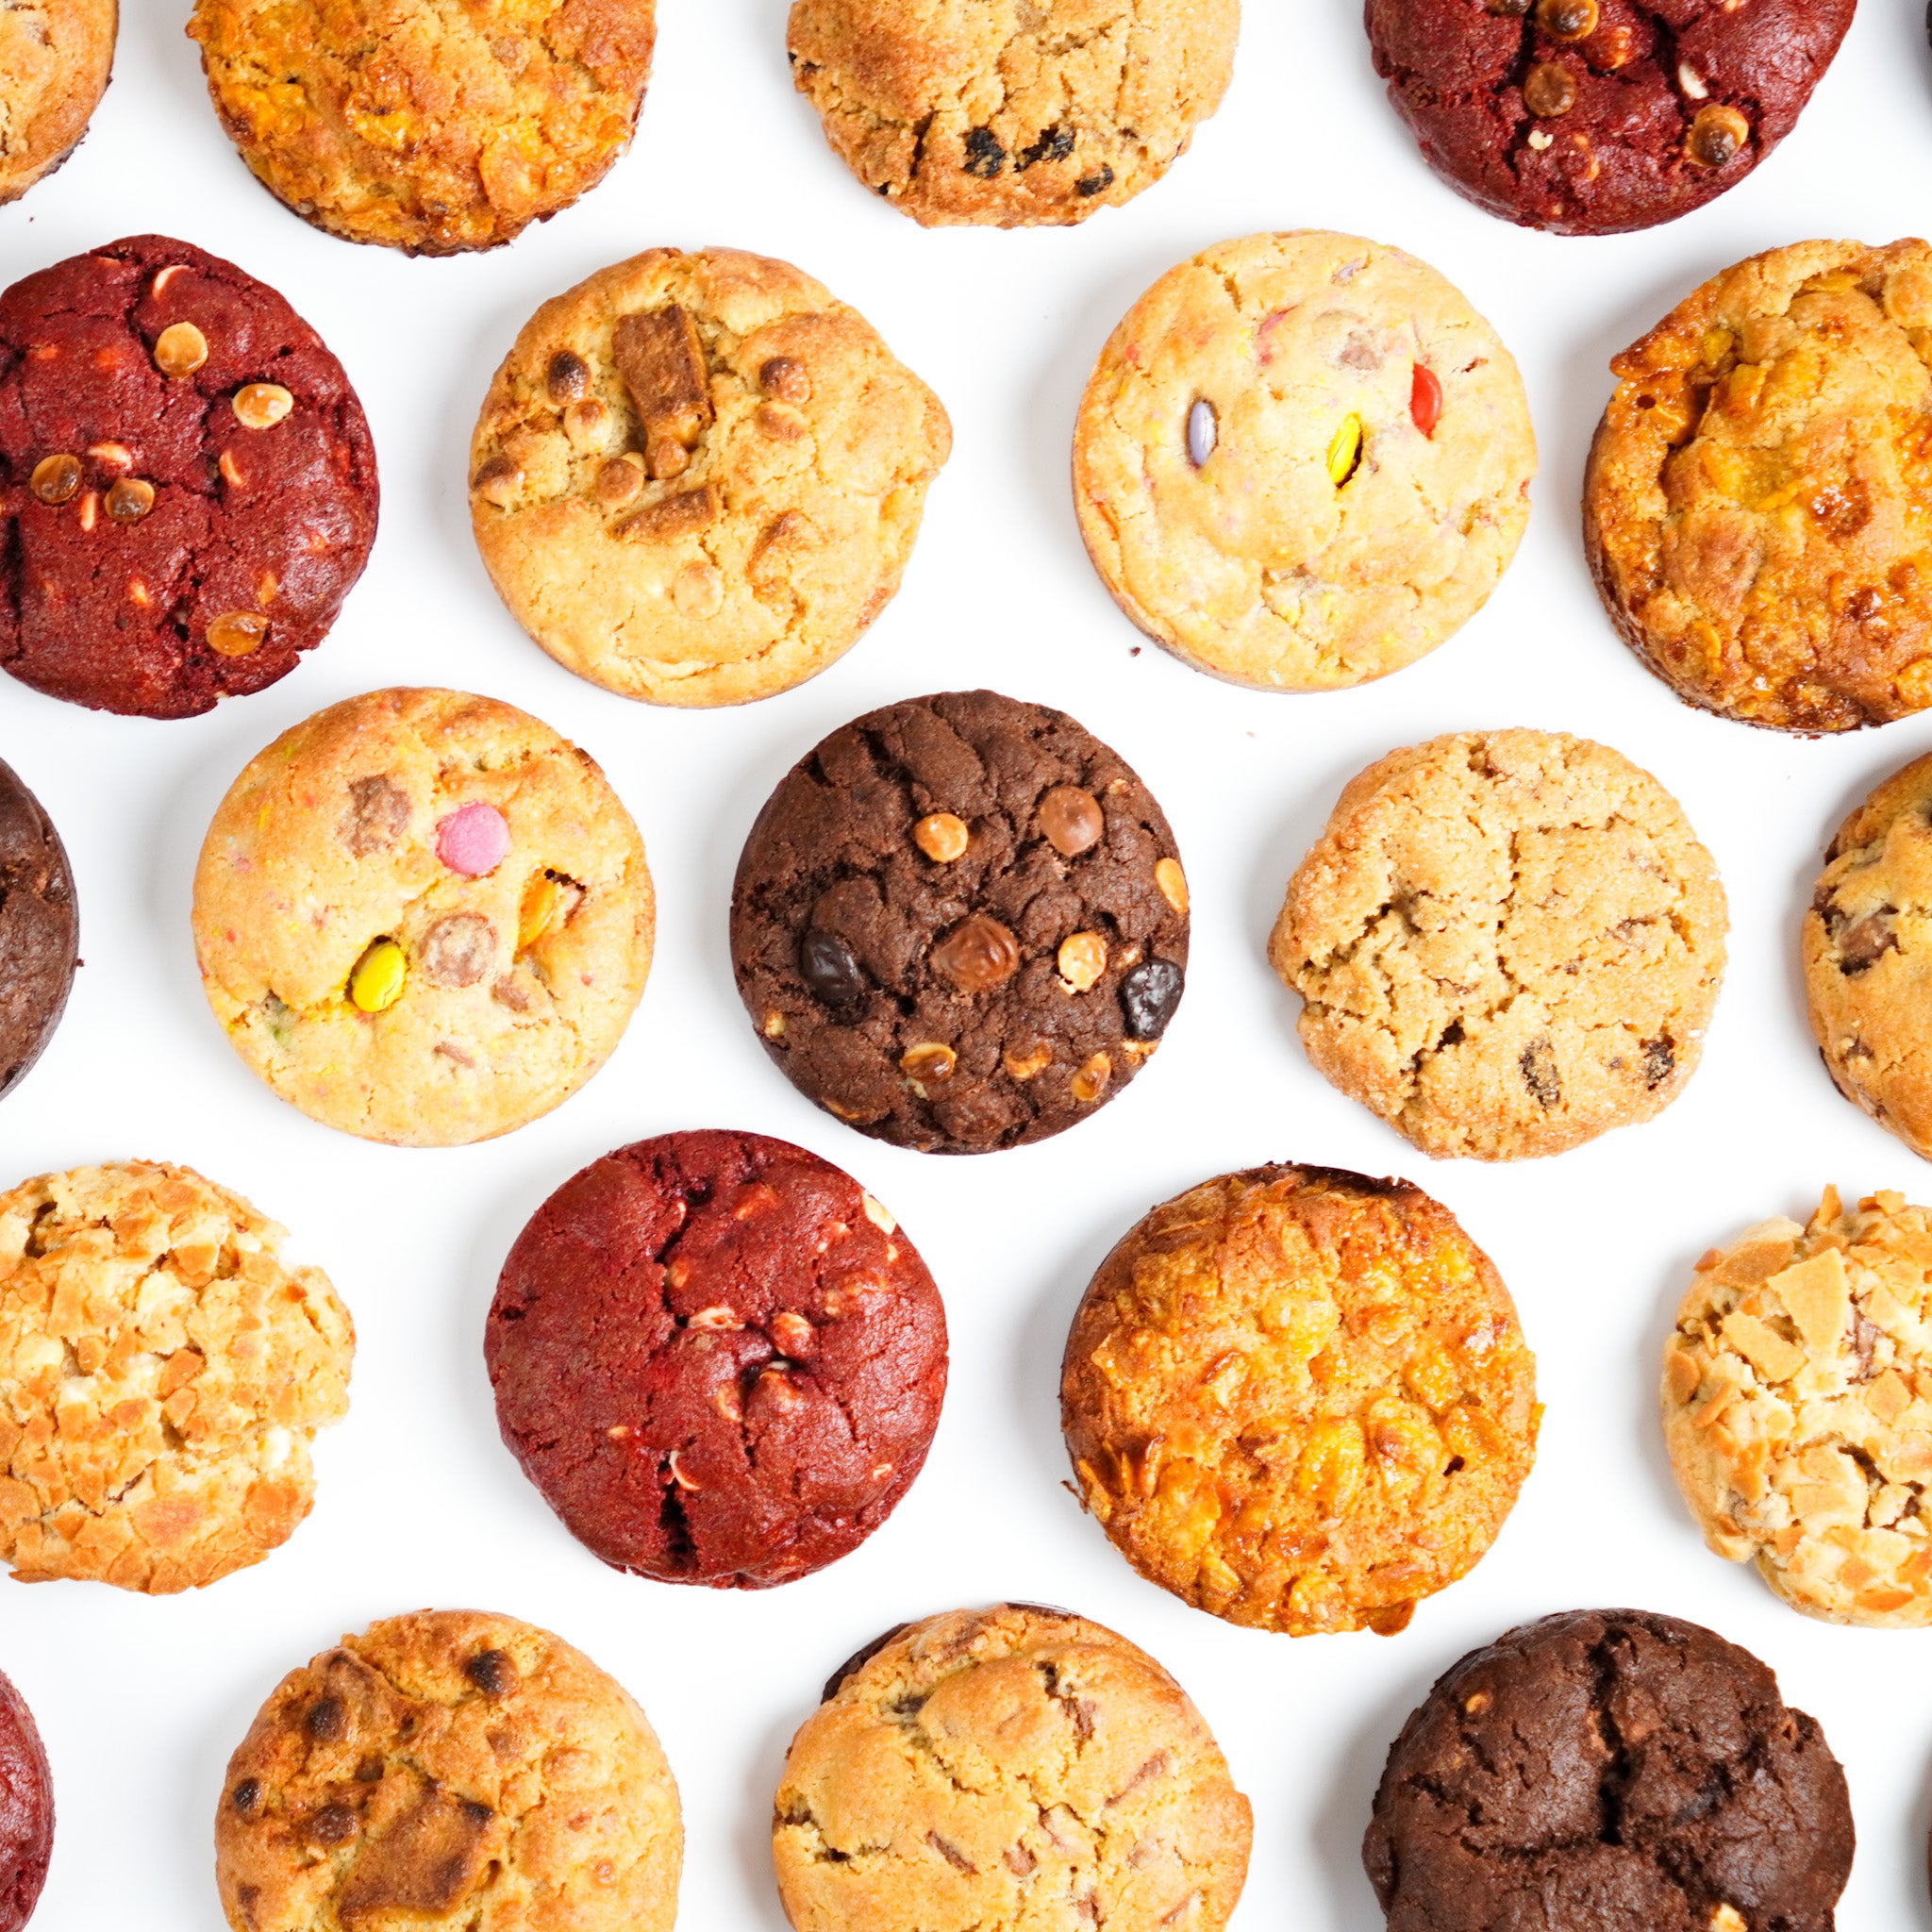 Build your Own Chunky Cookie Selection